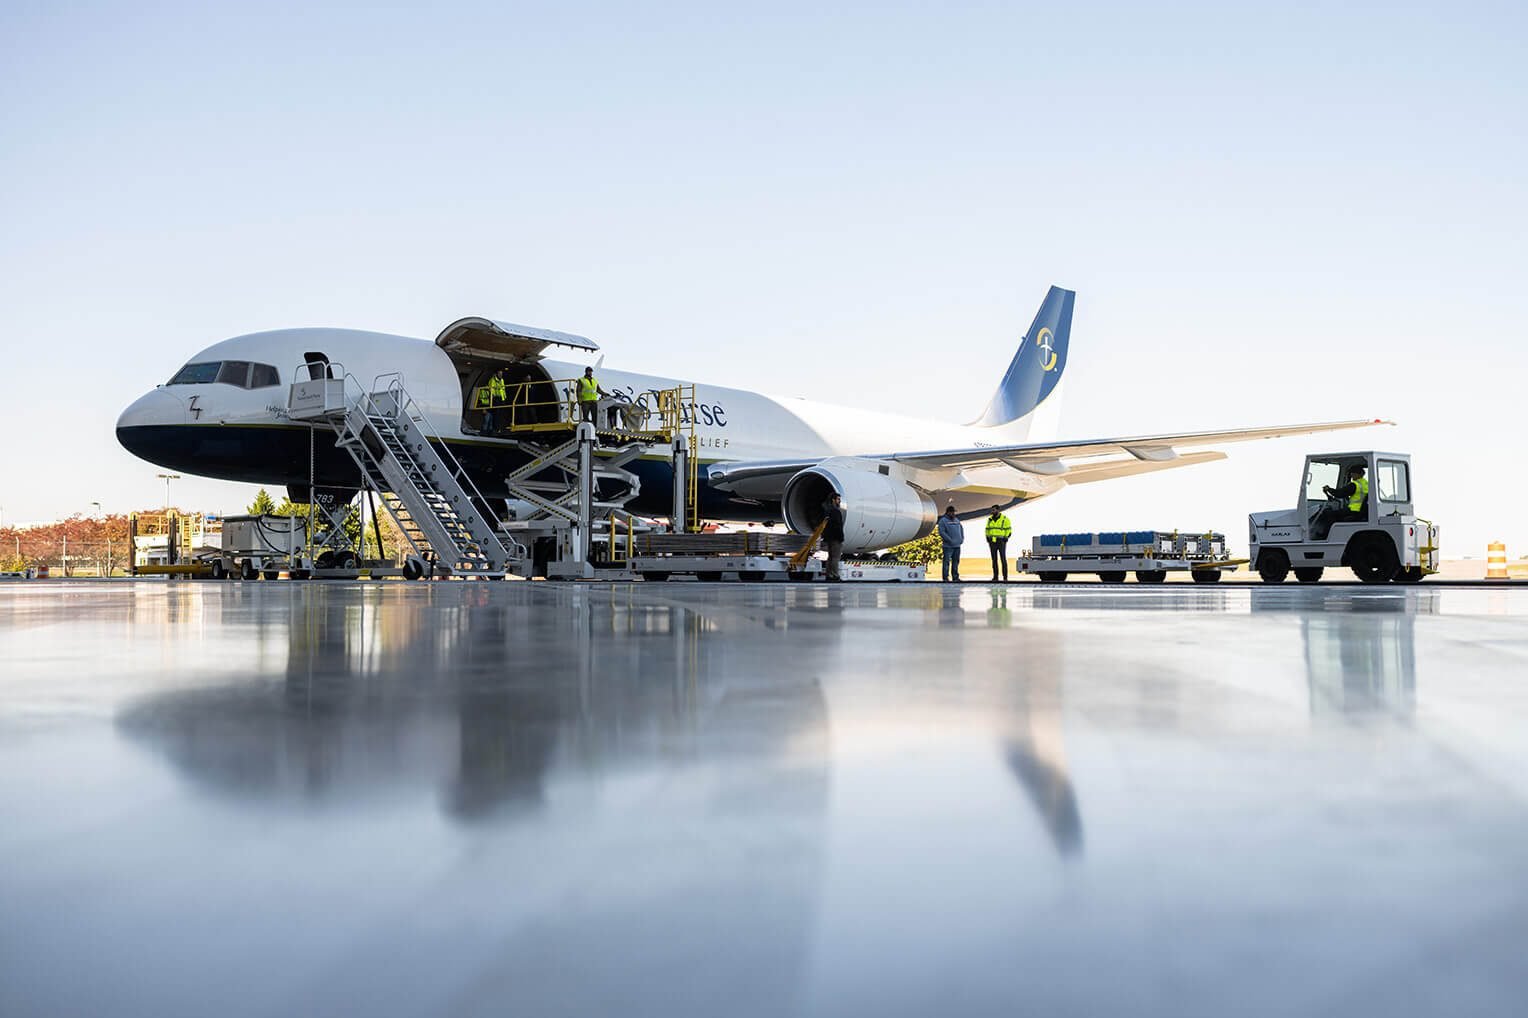 The afternoon before takeoff, Samaritan’s Purse 757 aircraft was loaded with 22 tonnes of relief supplies to aid hurricane survivors in Acapulco, Mexico.